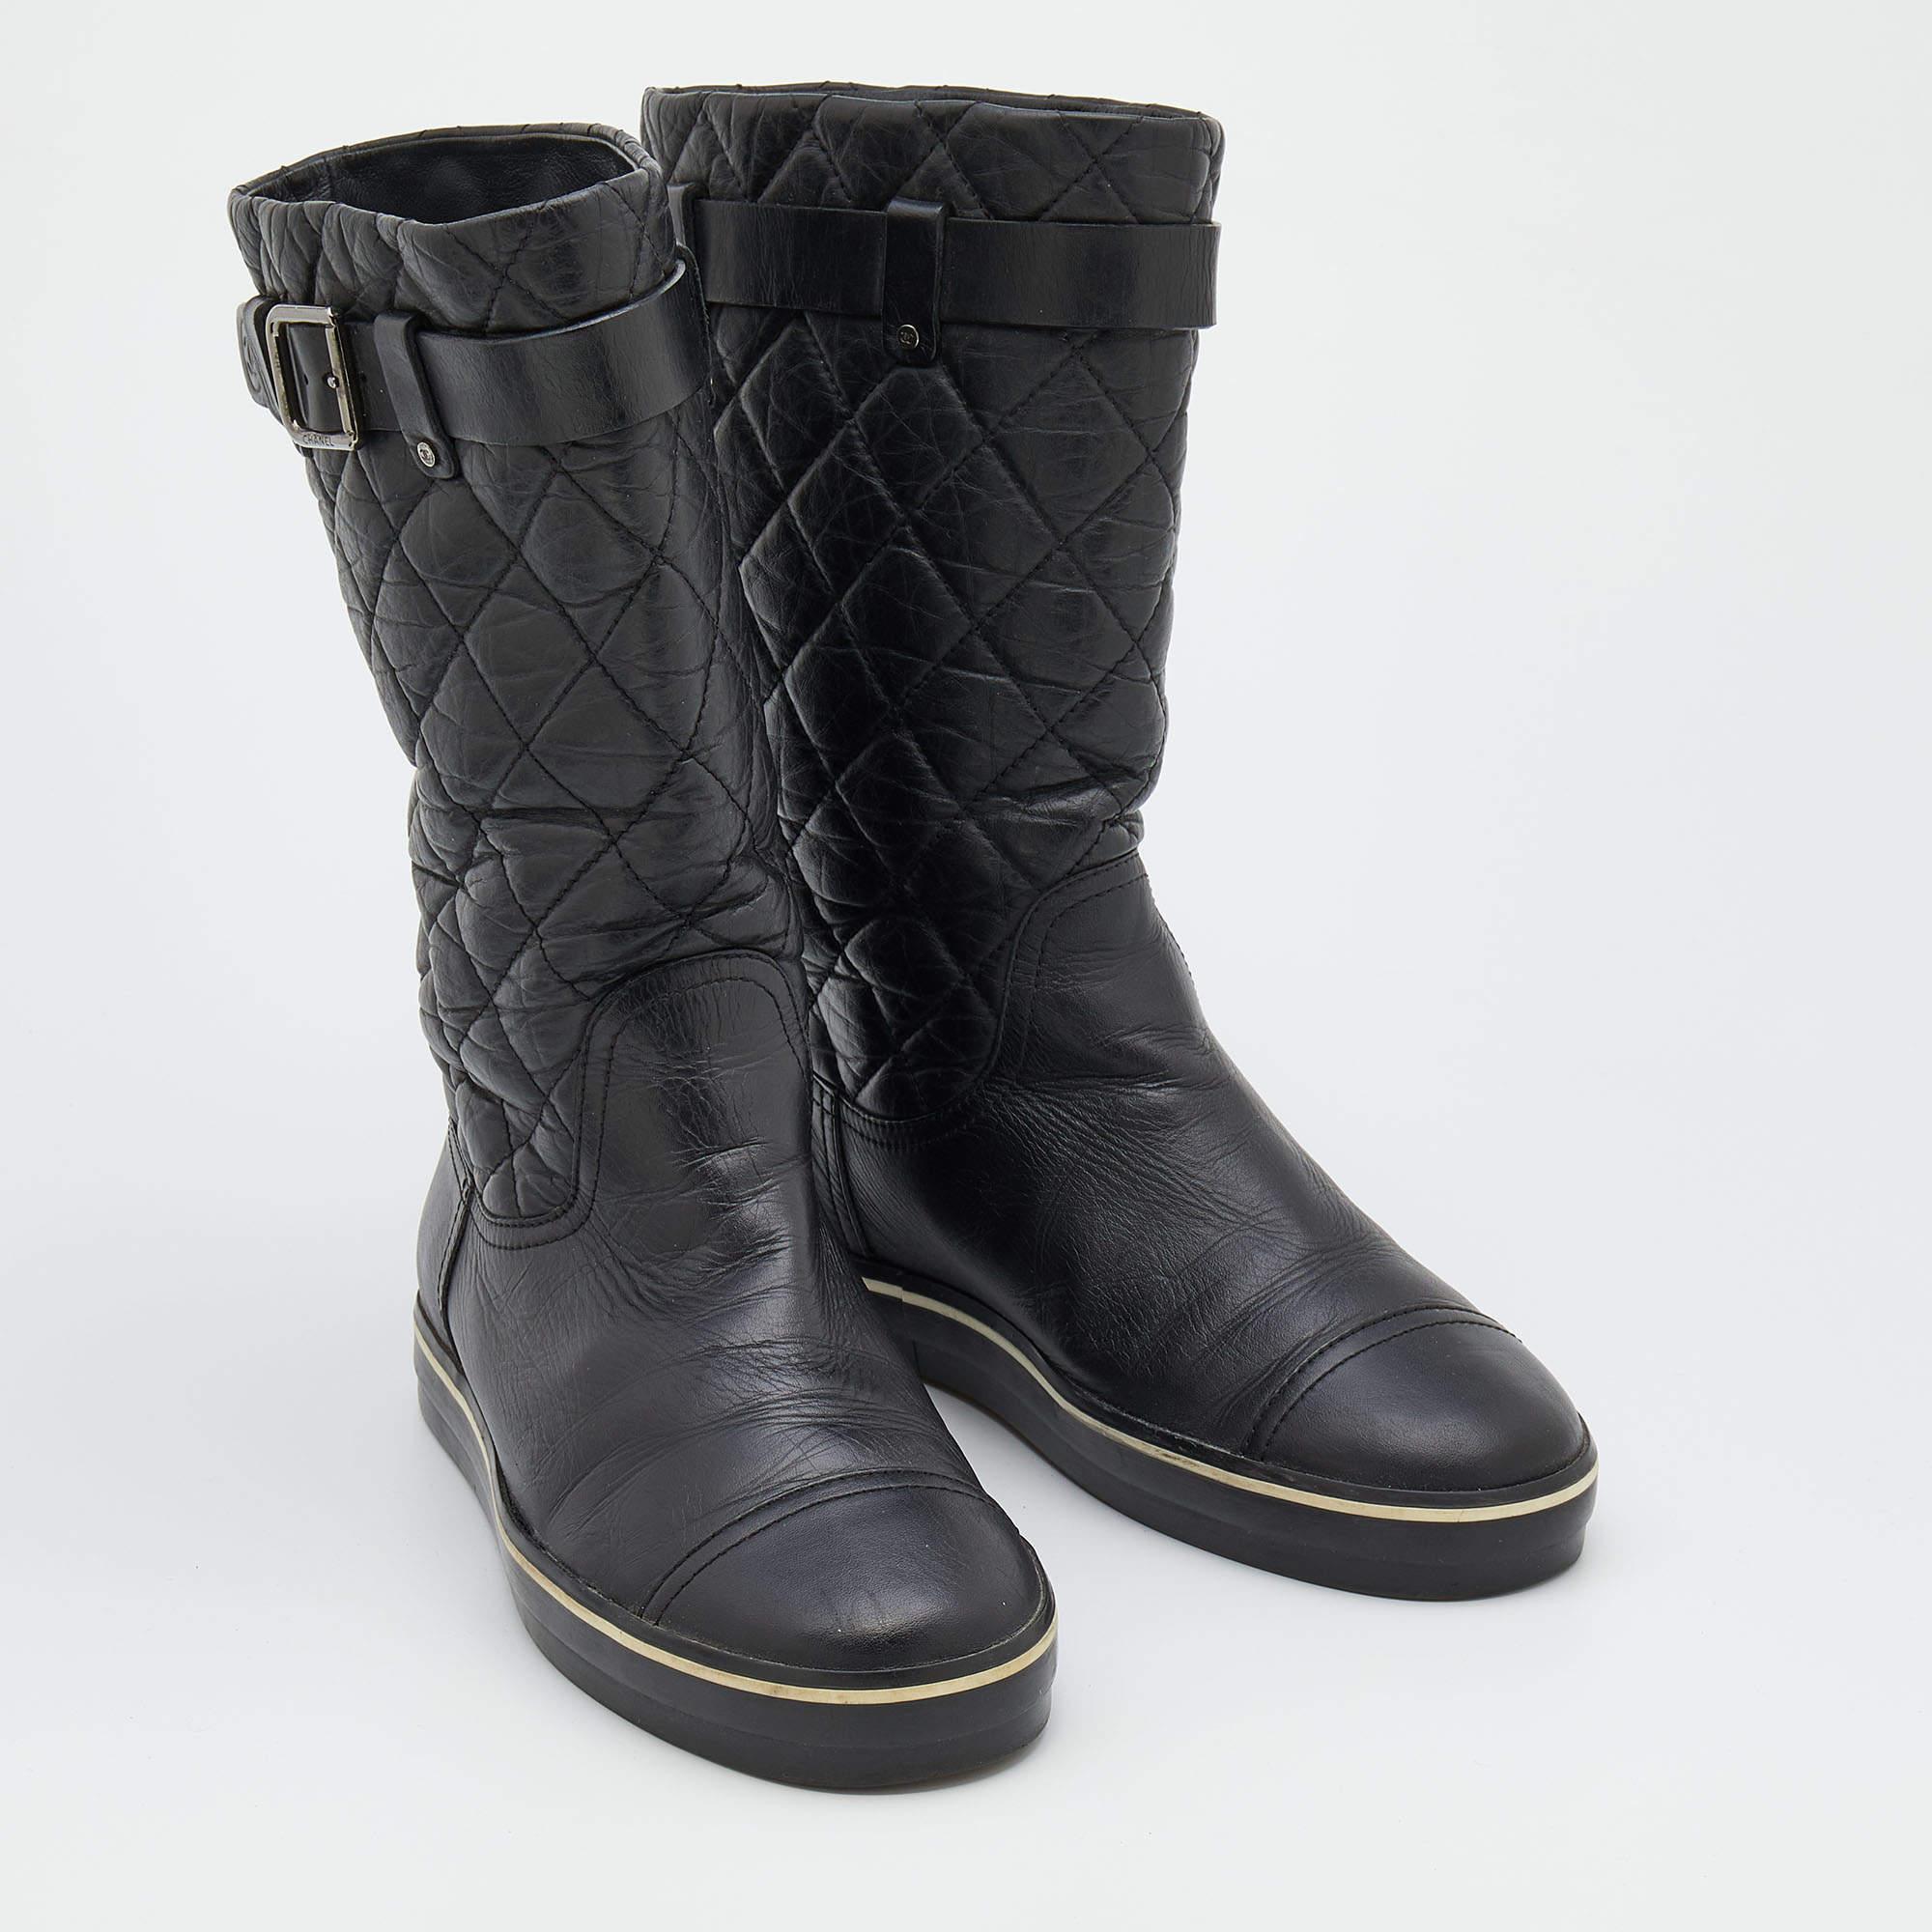 Women's Chanel Black Quilted Leather Mid Calf Length Boots Size 37.5